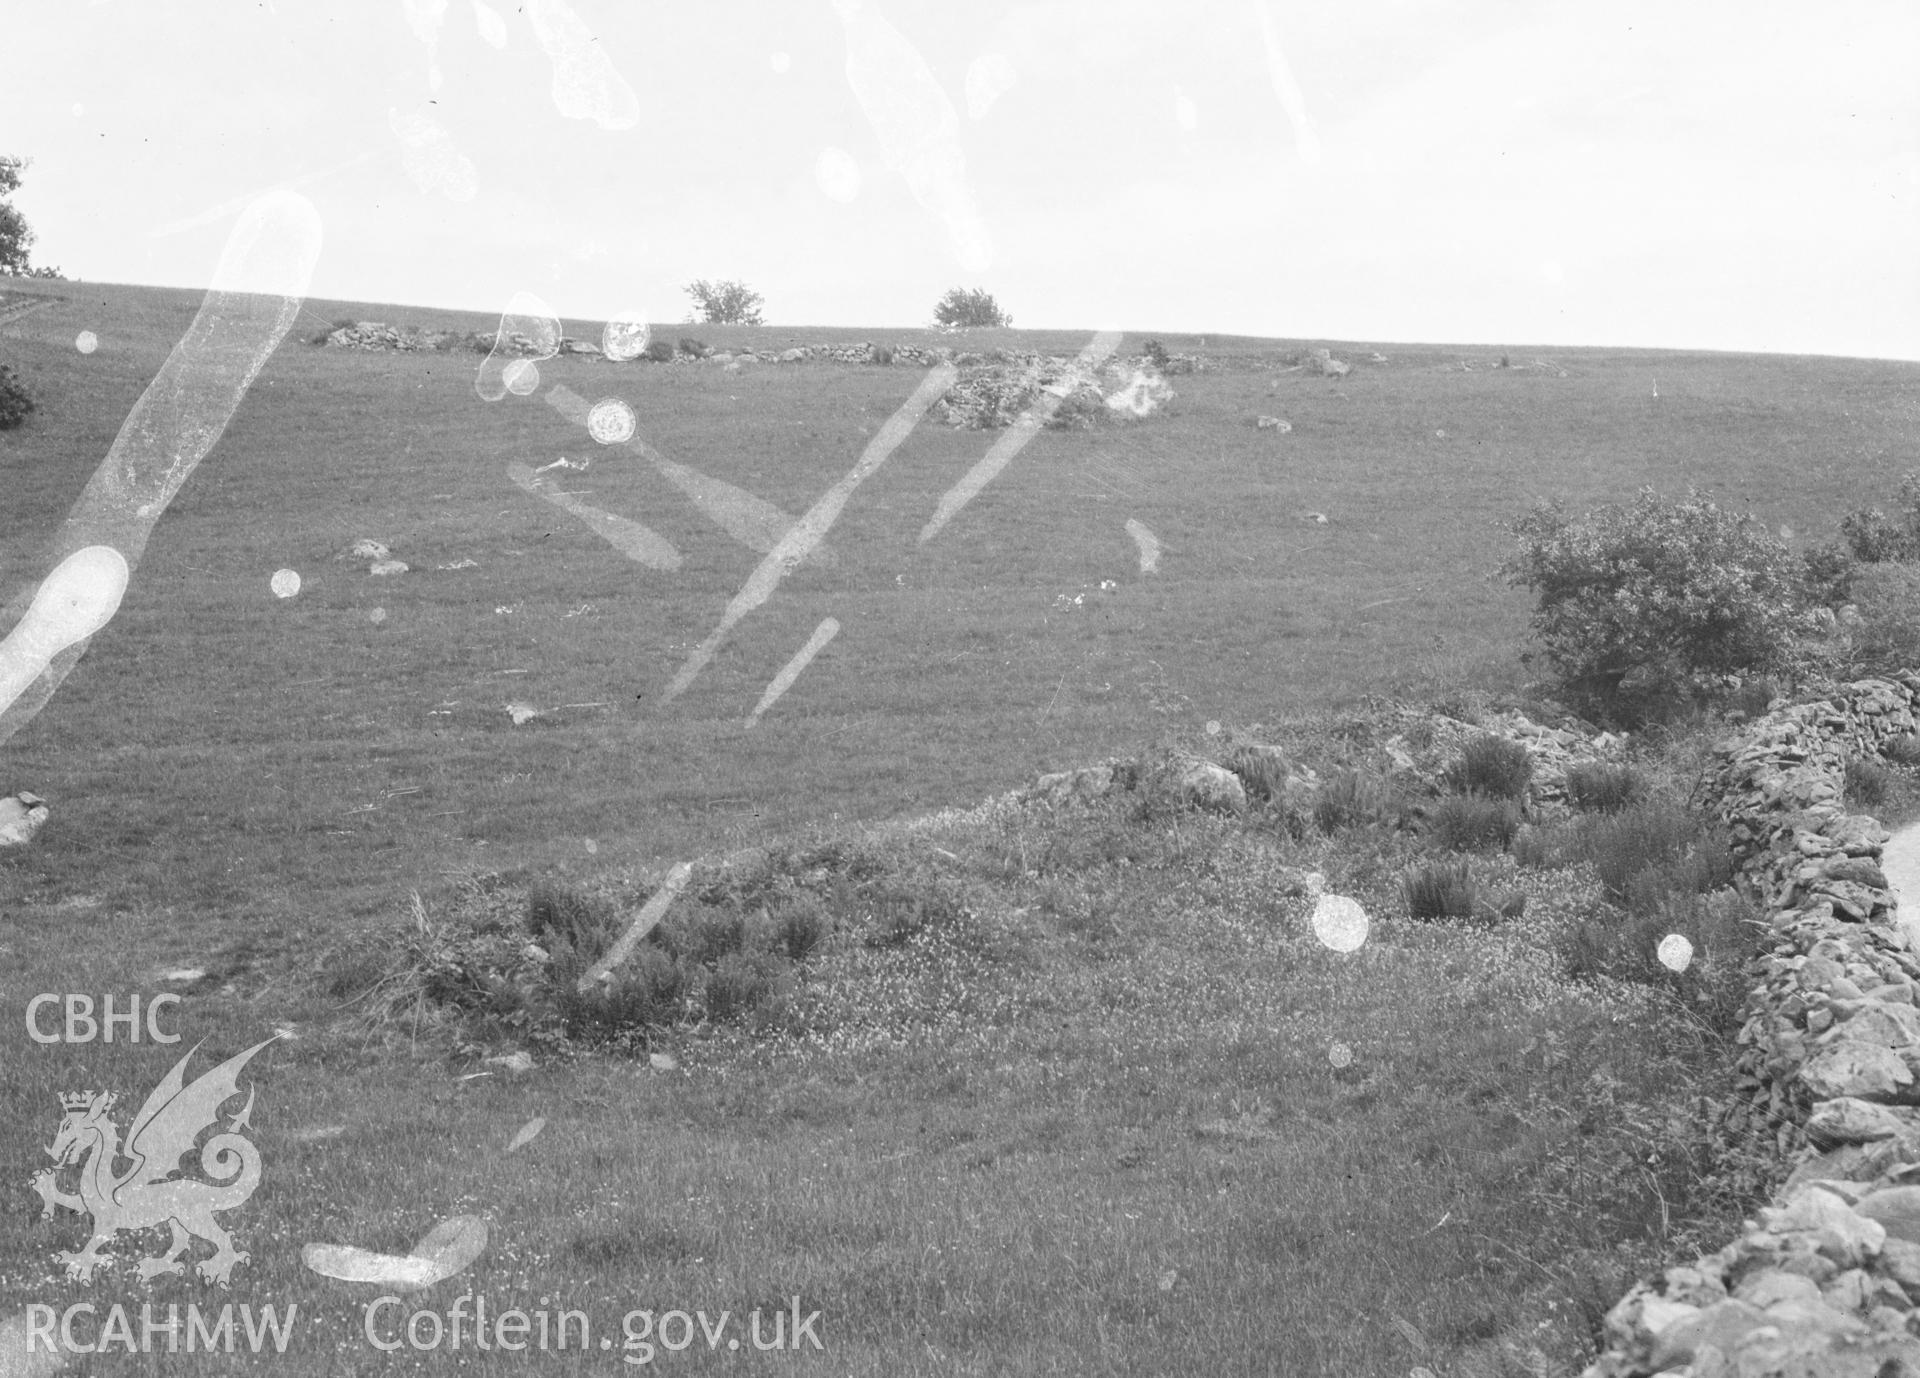 Digital copy of nitrate negative showing Bryn y Gefeiliau Roman site. Transcript of reverse of photograph: 'Caernarvon. Capel Curig. Roman Road below Bryn y Gefeiliau farm where it diverges from modern road up to farm.' Cadw Monuments in Care Collection.